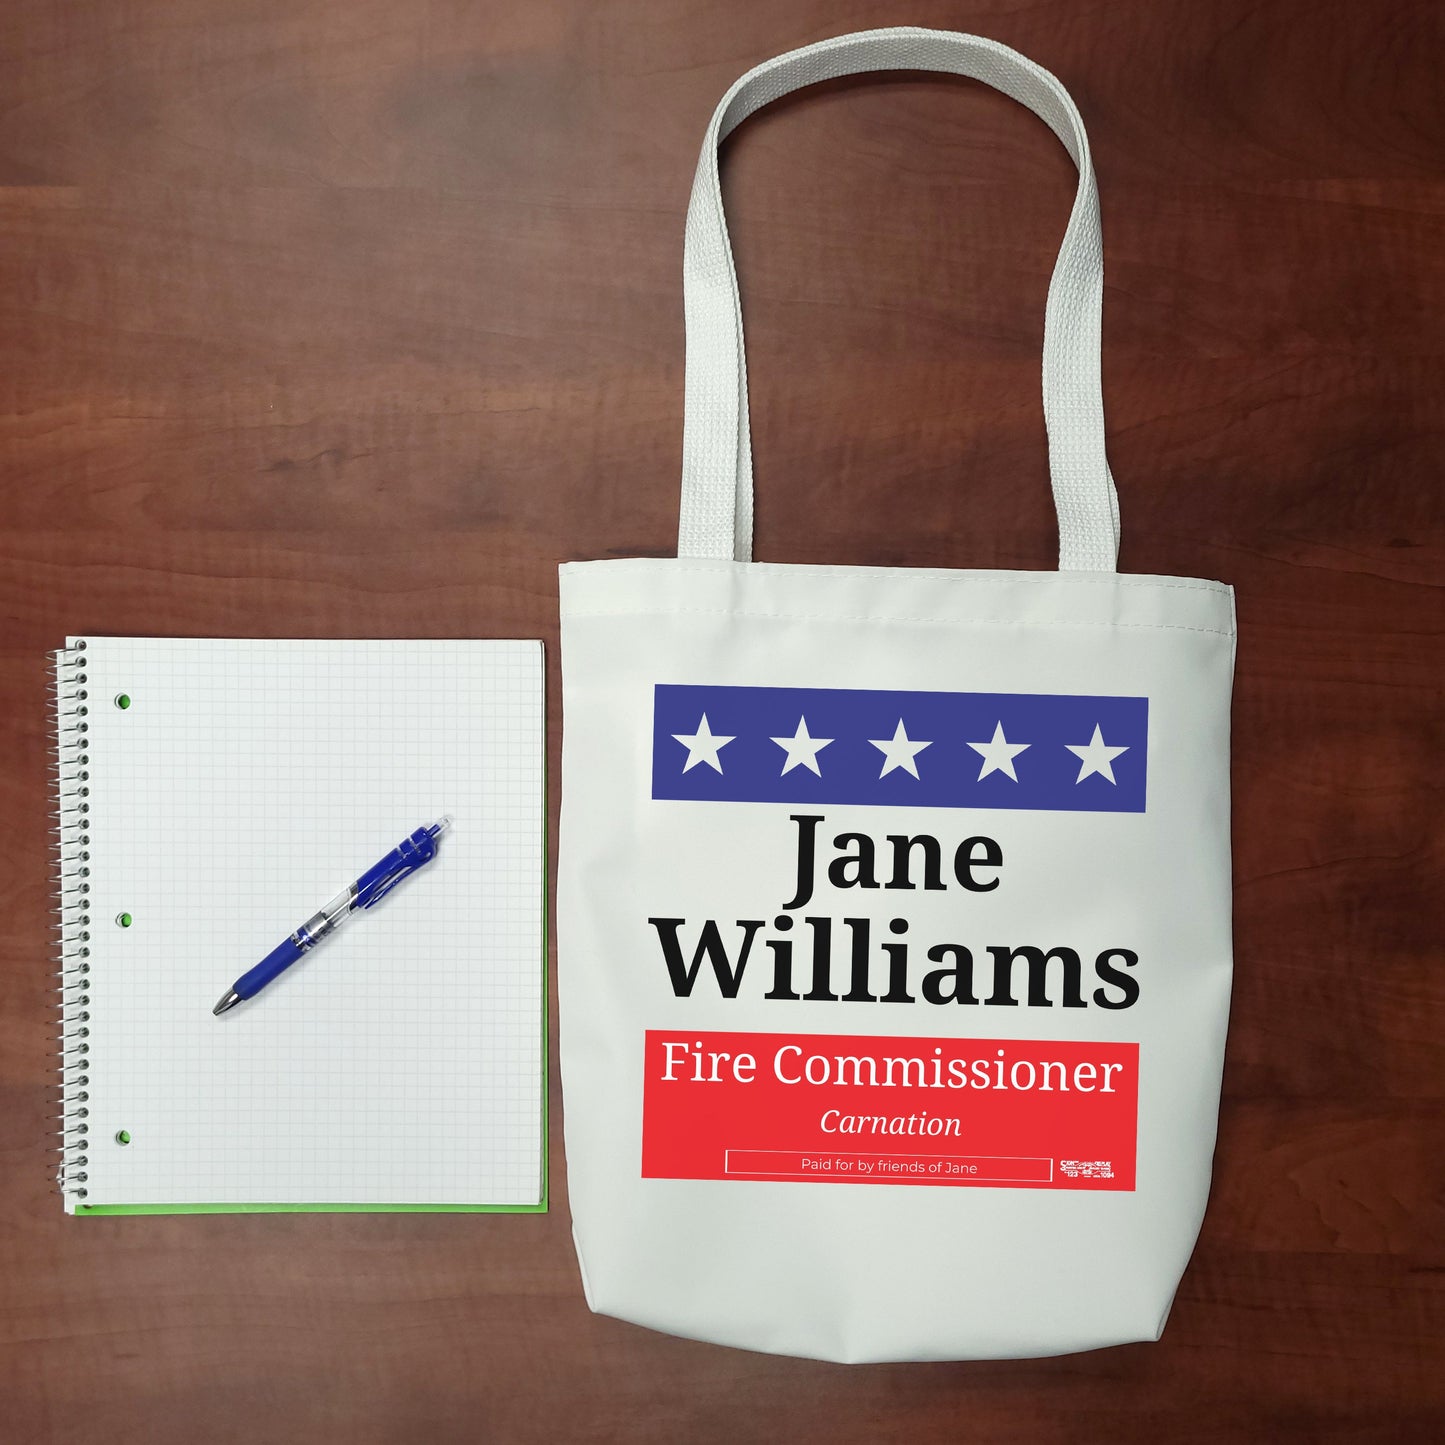 Configure my custom tote bag for ActBlue - DemParty